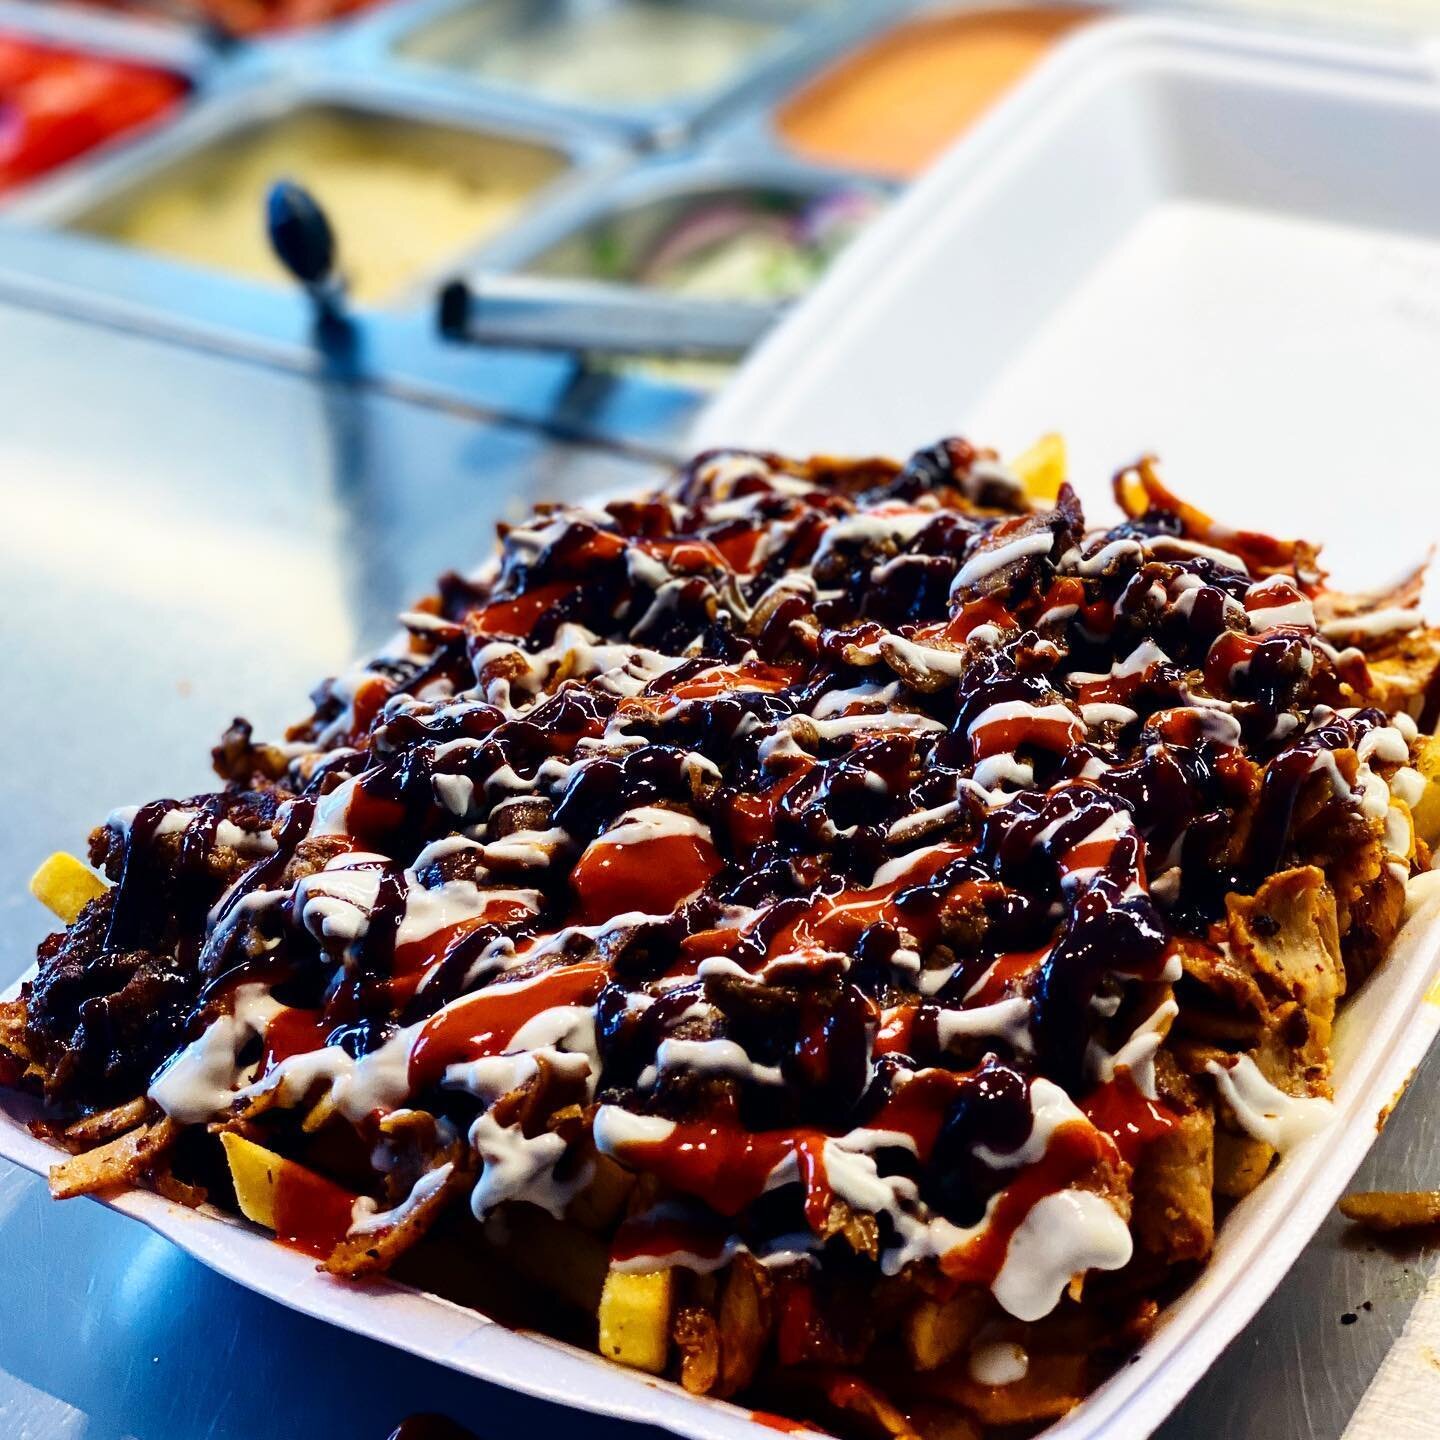 Our Delicious SNACK PACKS are available all weekend... even on public holidays! 
#kebabs #hsp #halalsnackpackappreciationsociety #halalsnackpack #queensbirtbday